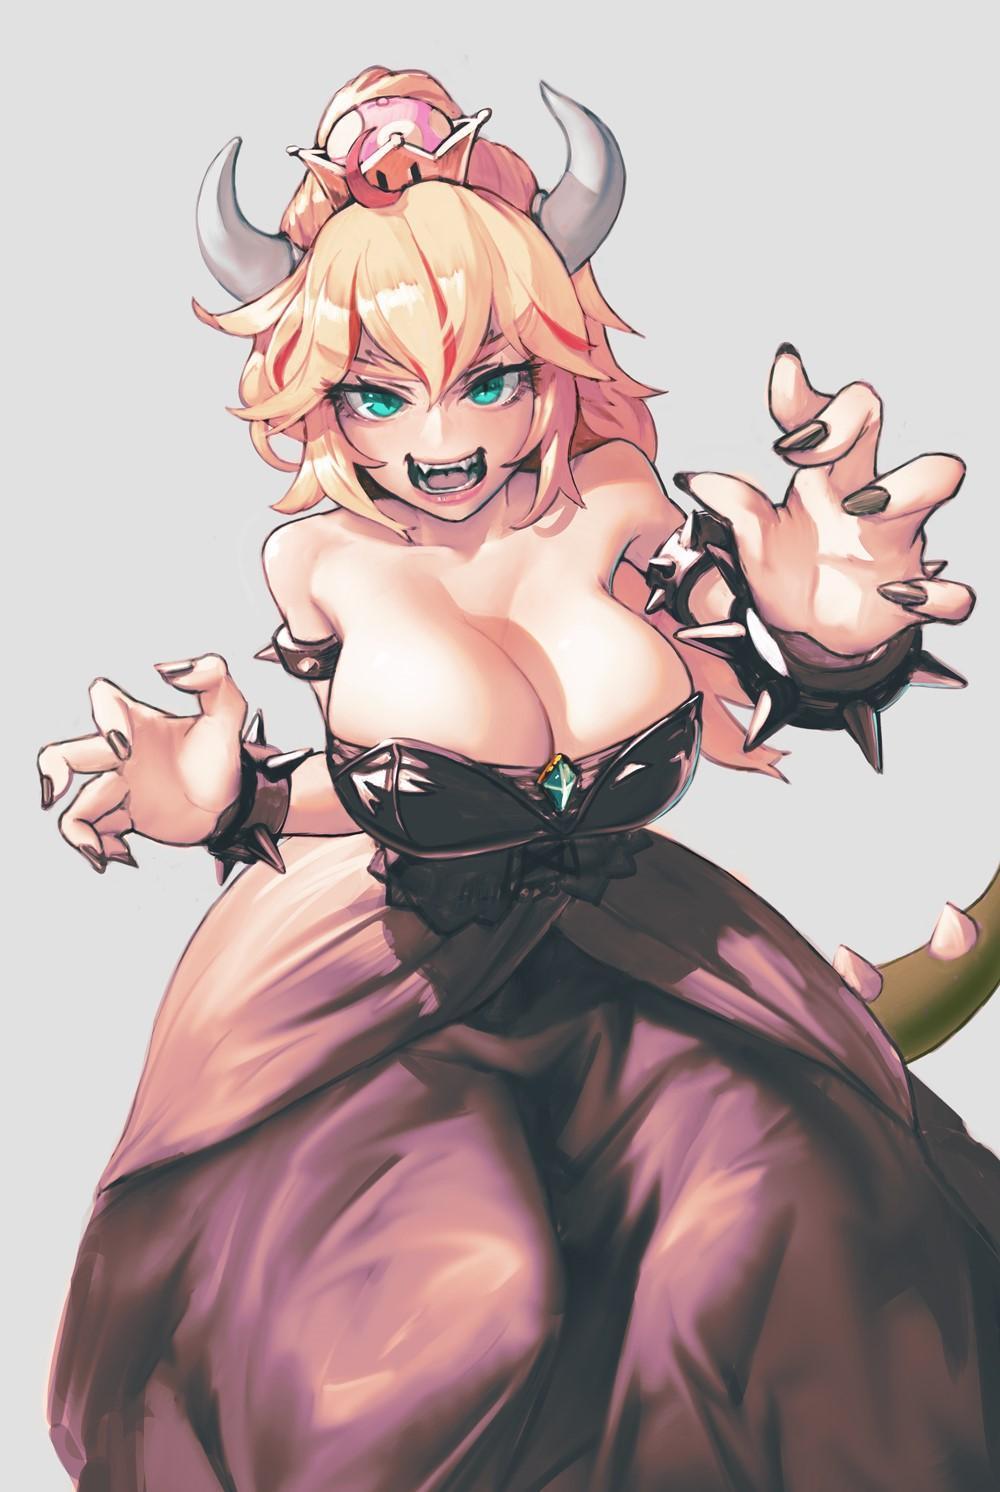 HD wallpaper, Dress, Cleavage, Anime, Frontal View, Long Nails, Bowsette, Wristband, Big Boobs, Spikes